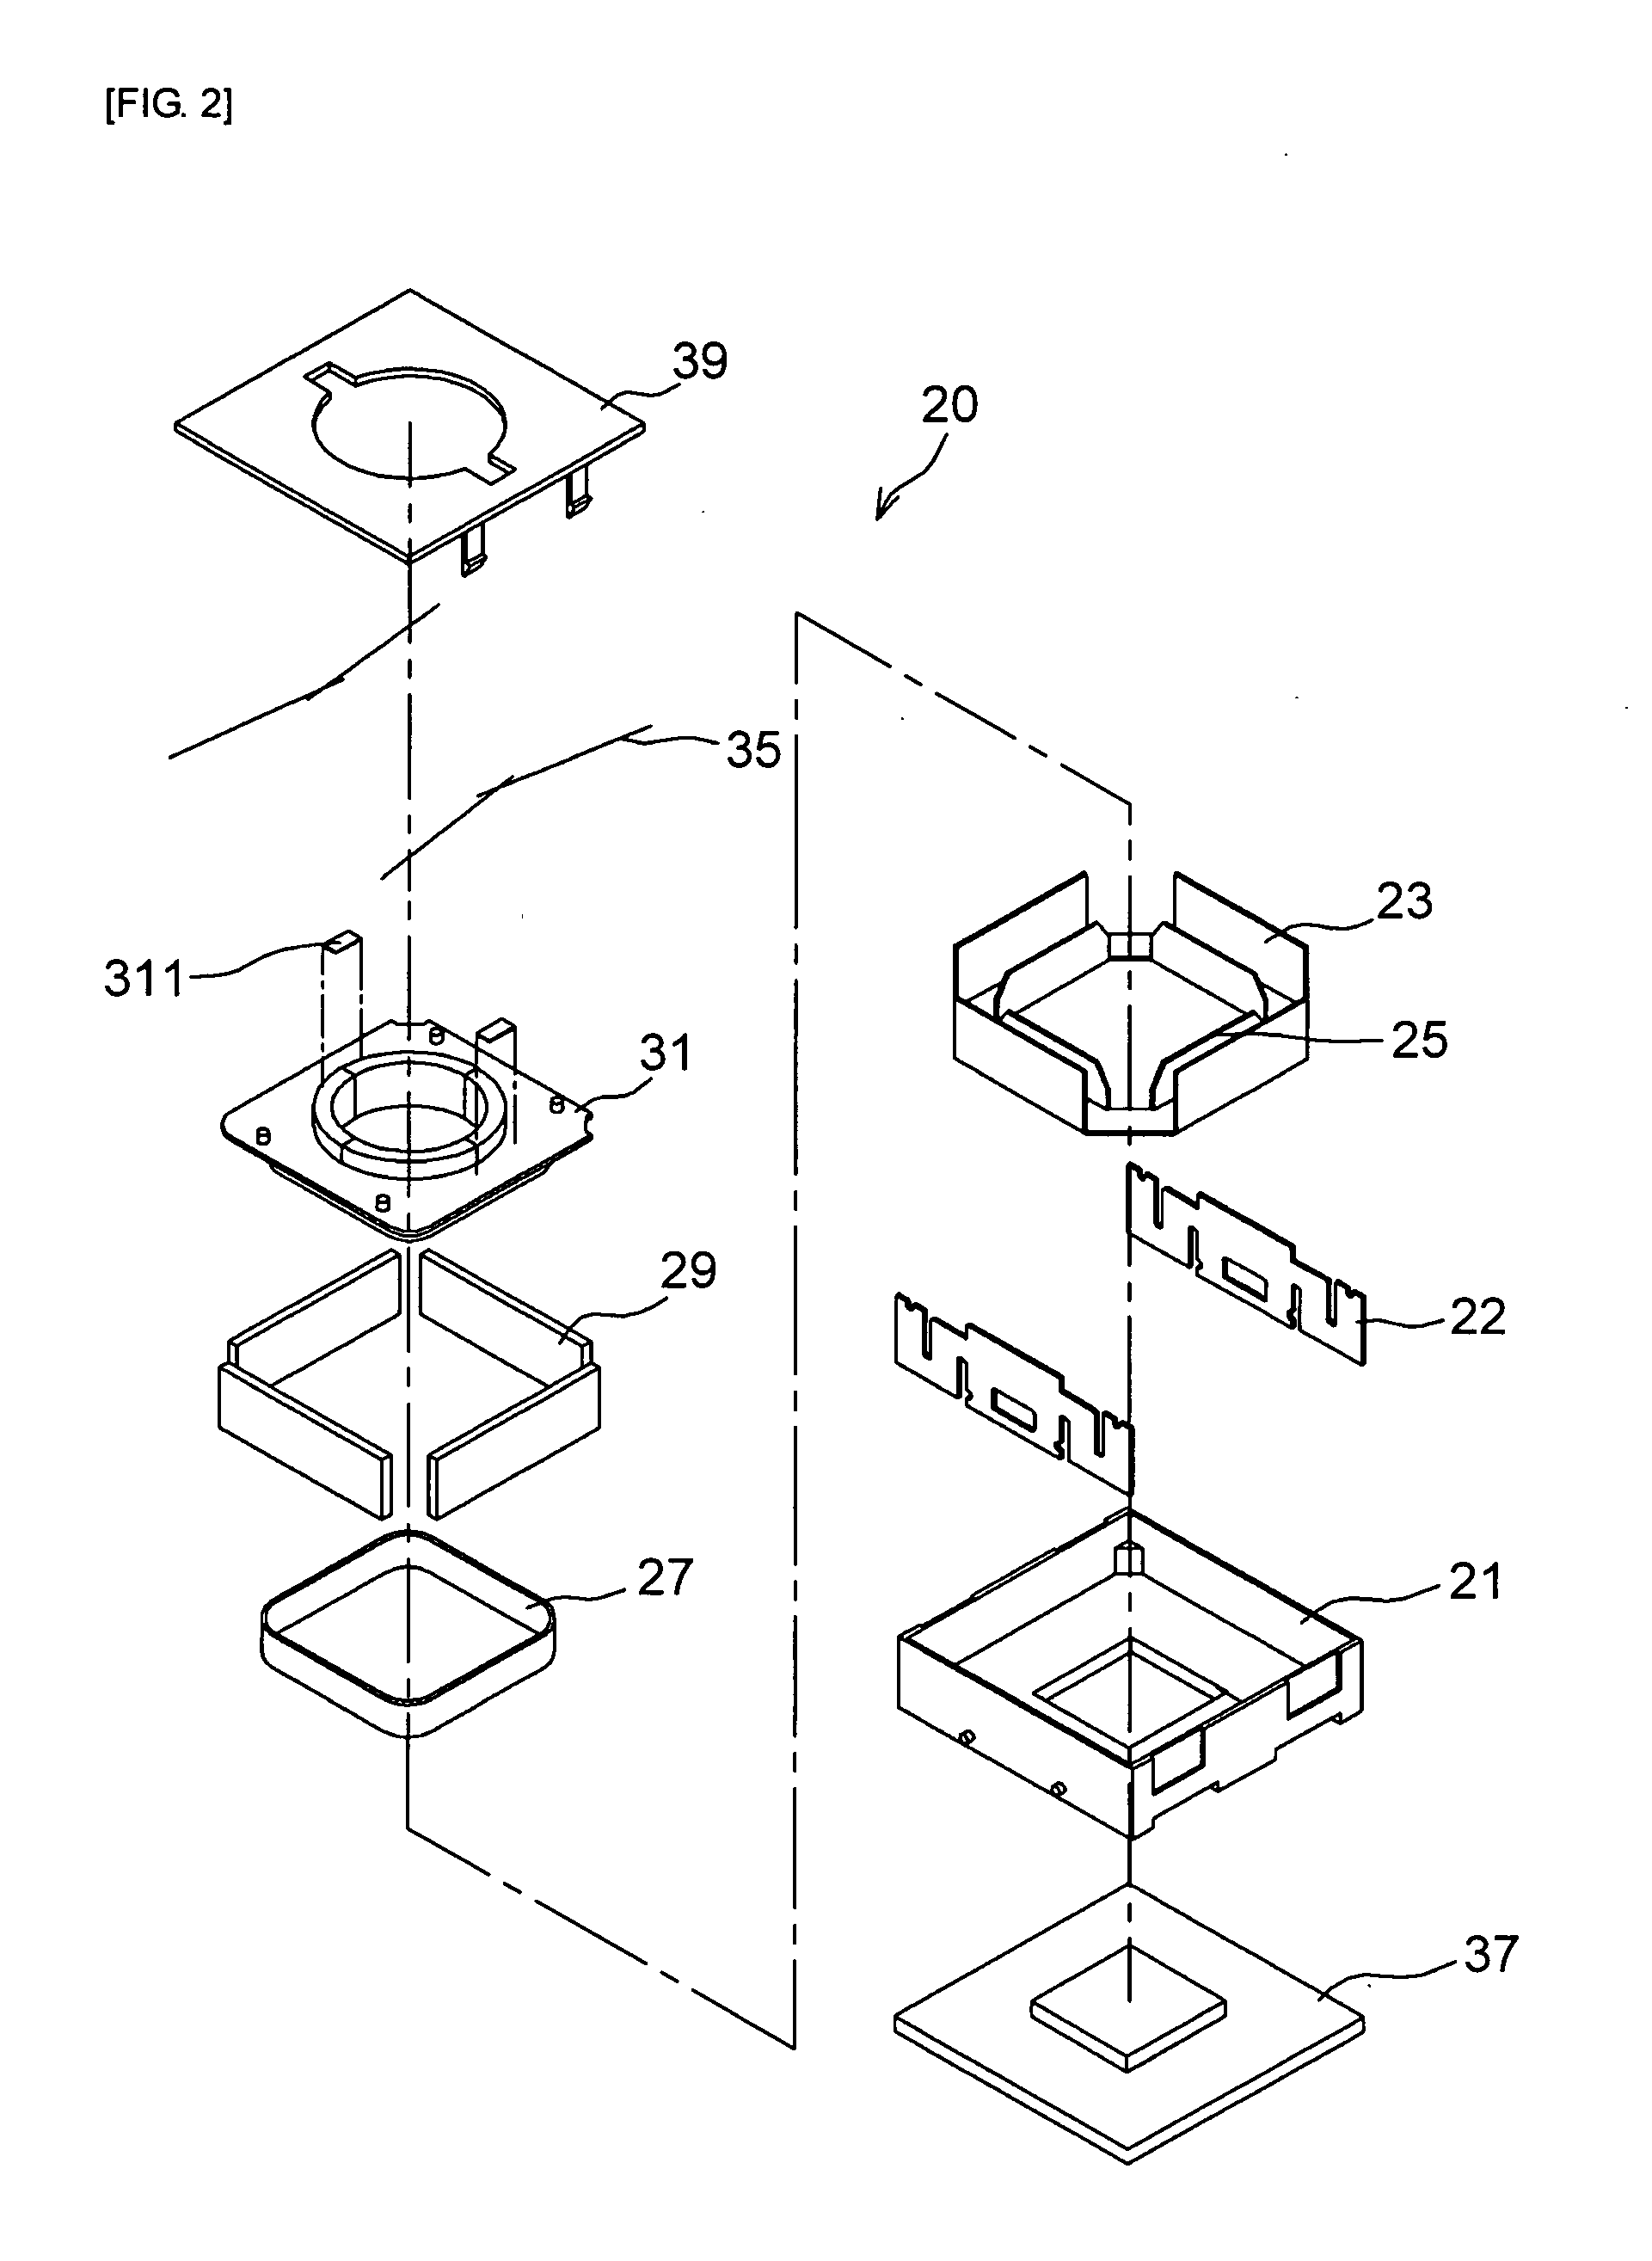 Actuator for mobile device